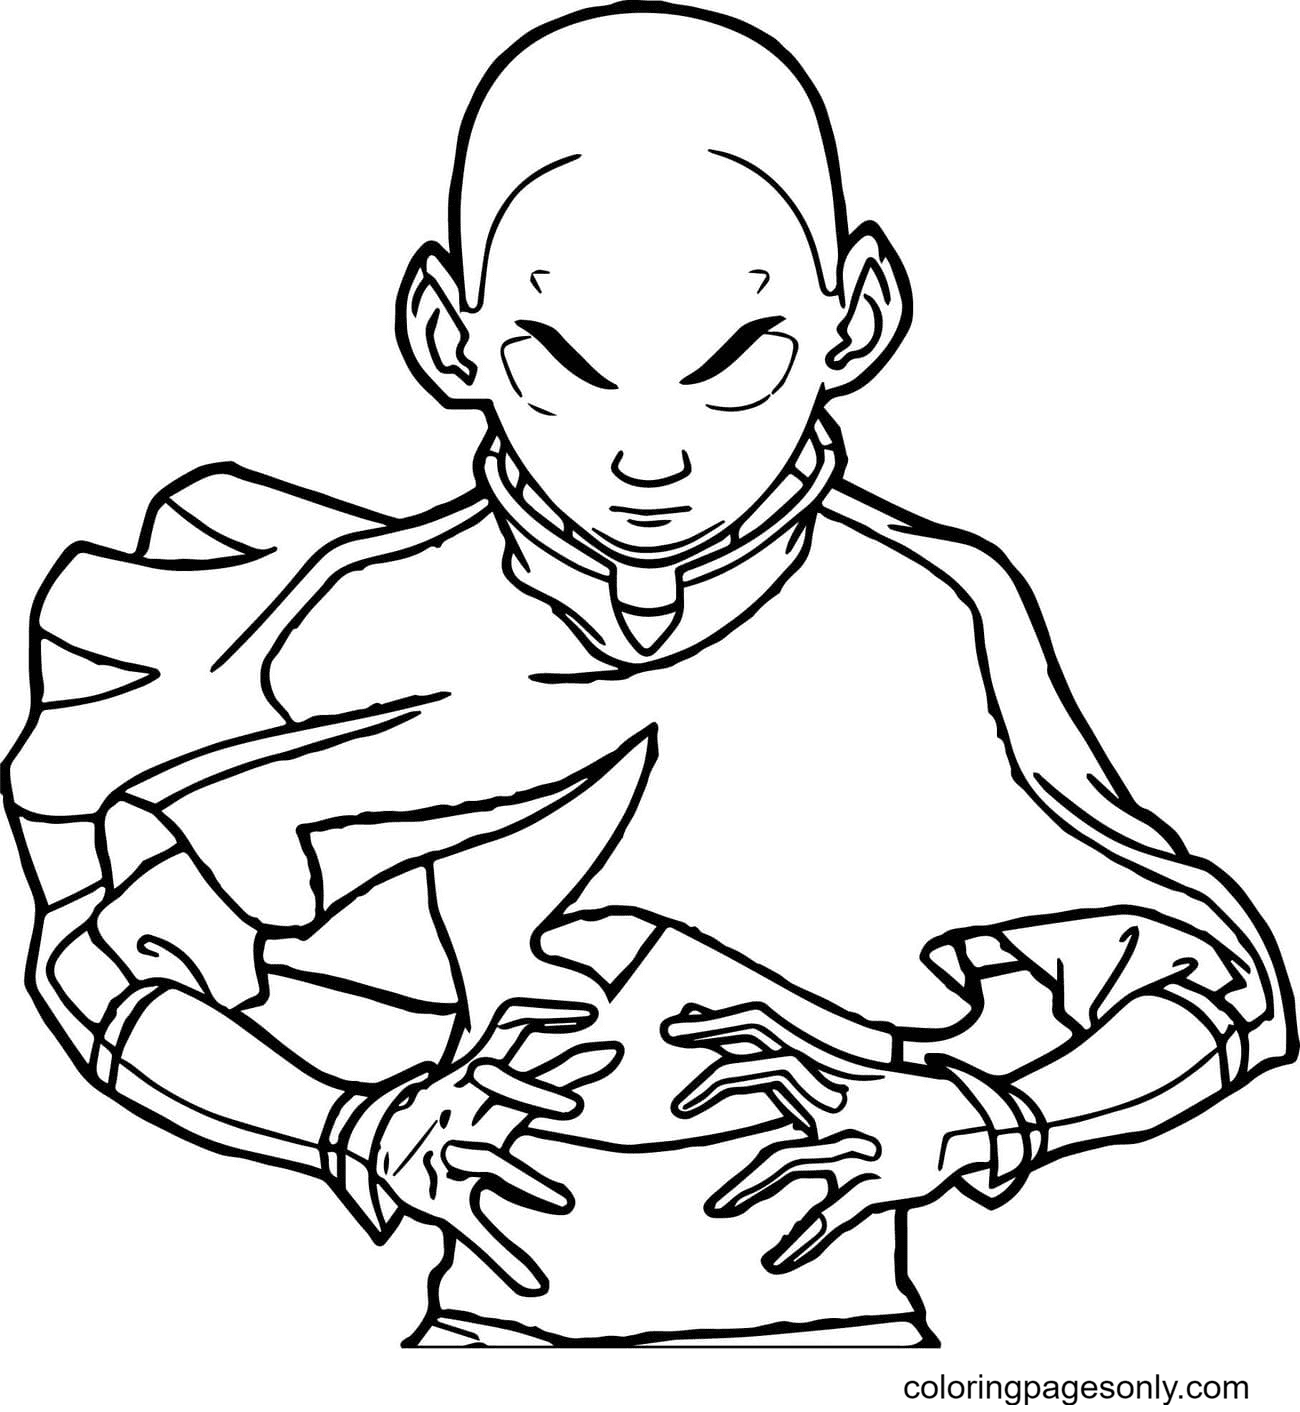 Avatar The Last Airbender Coloring Pages Aang 3836